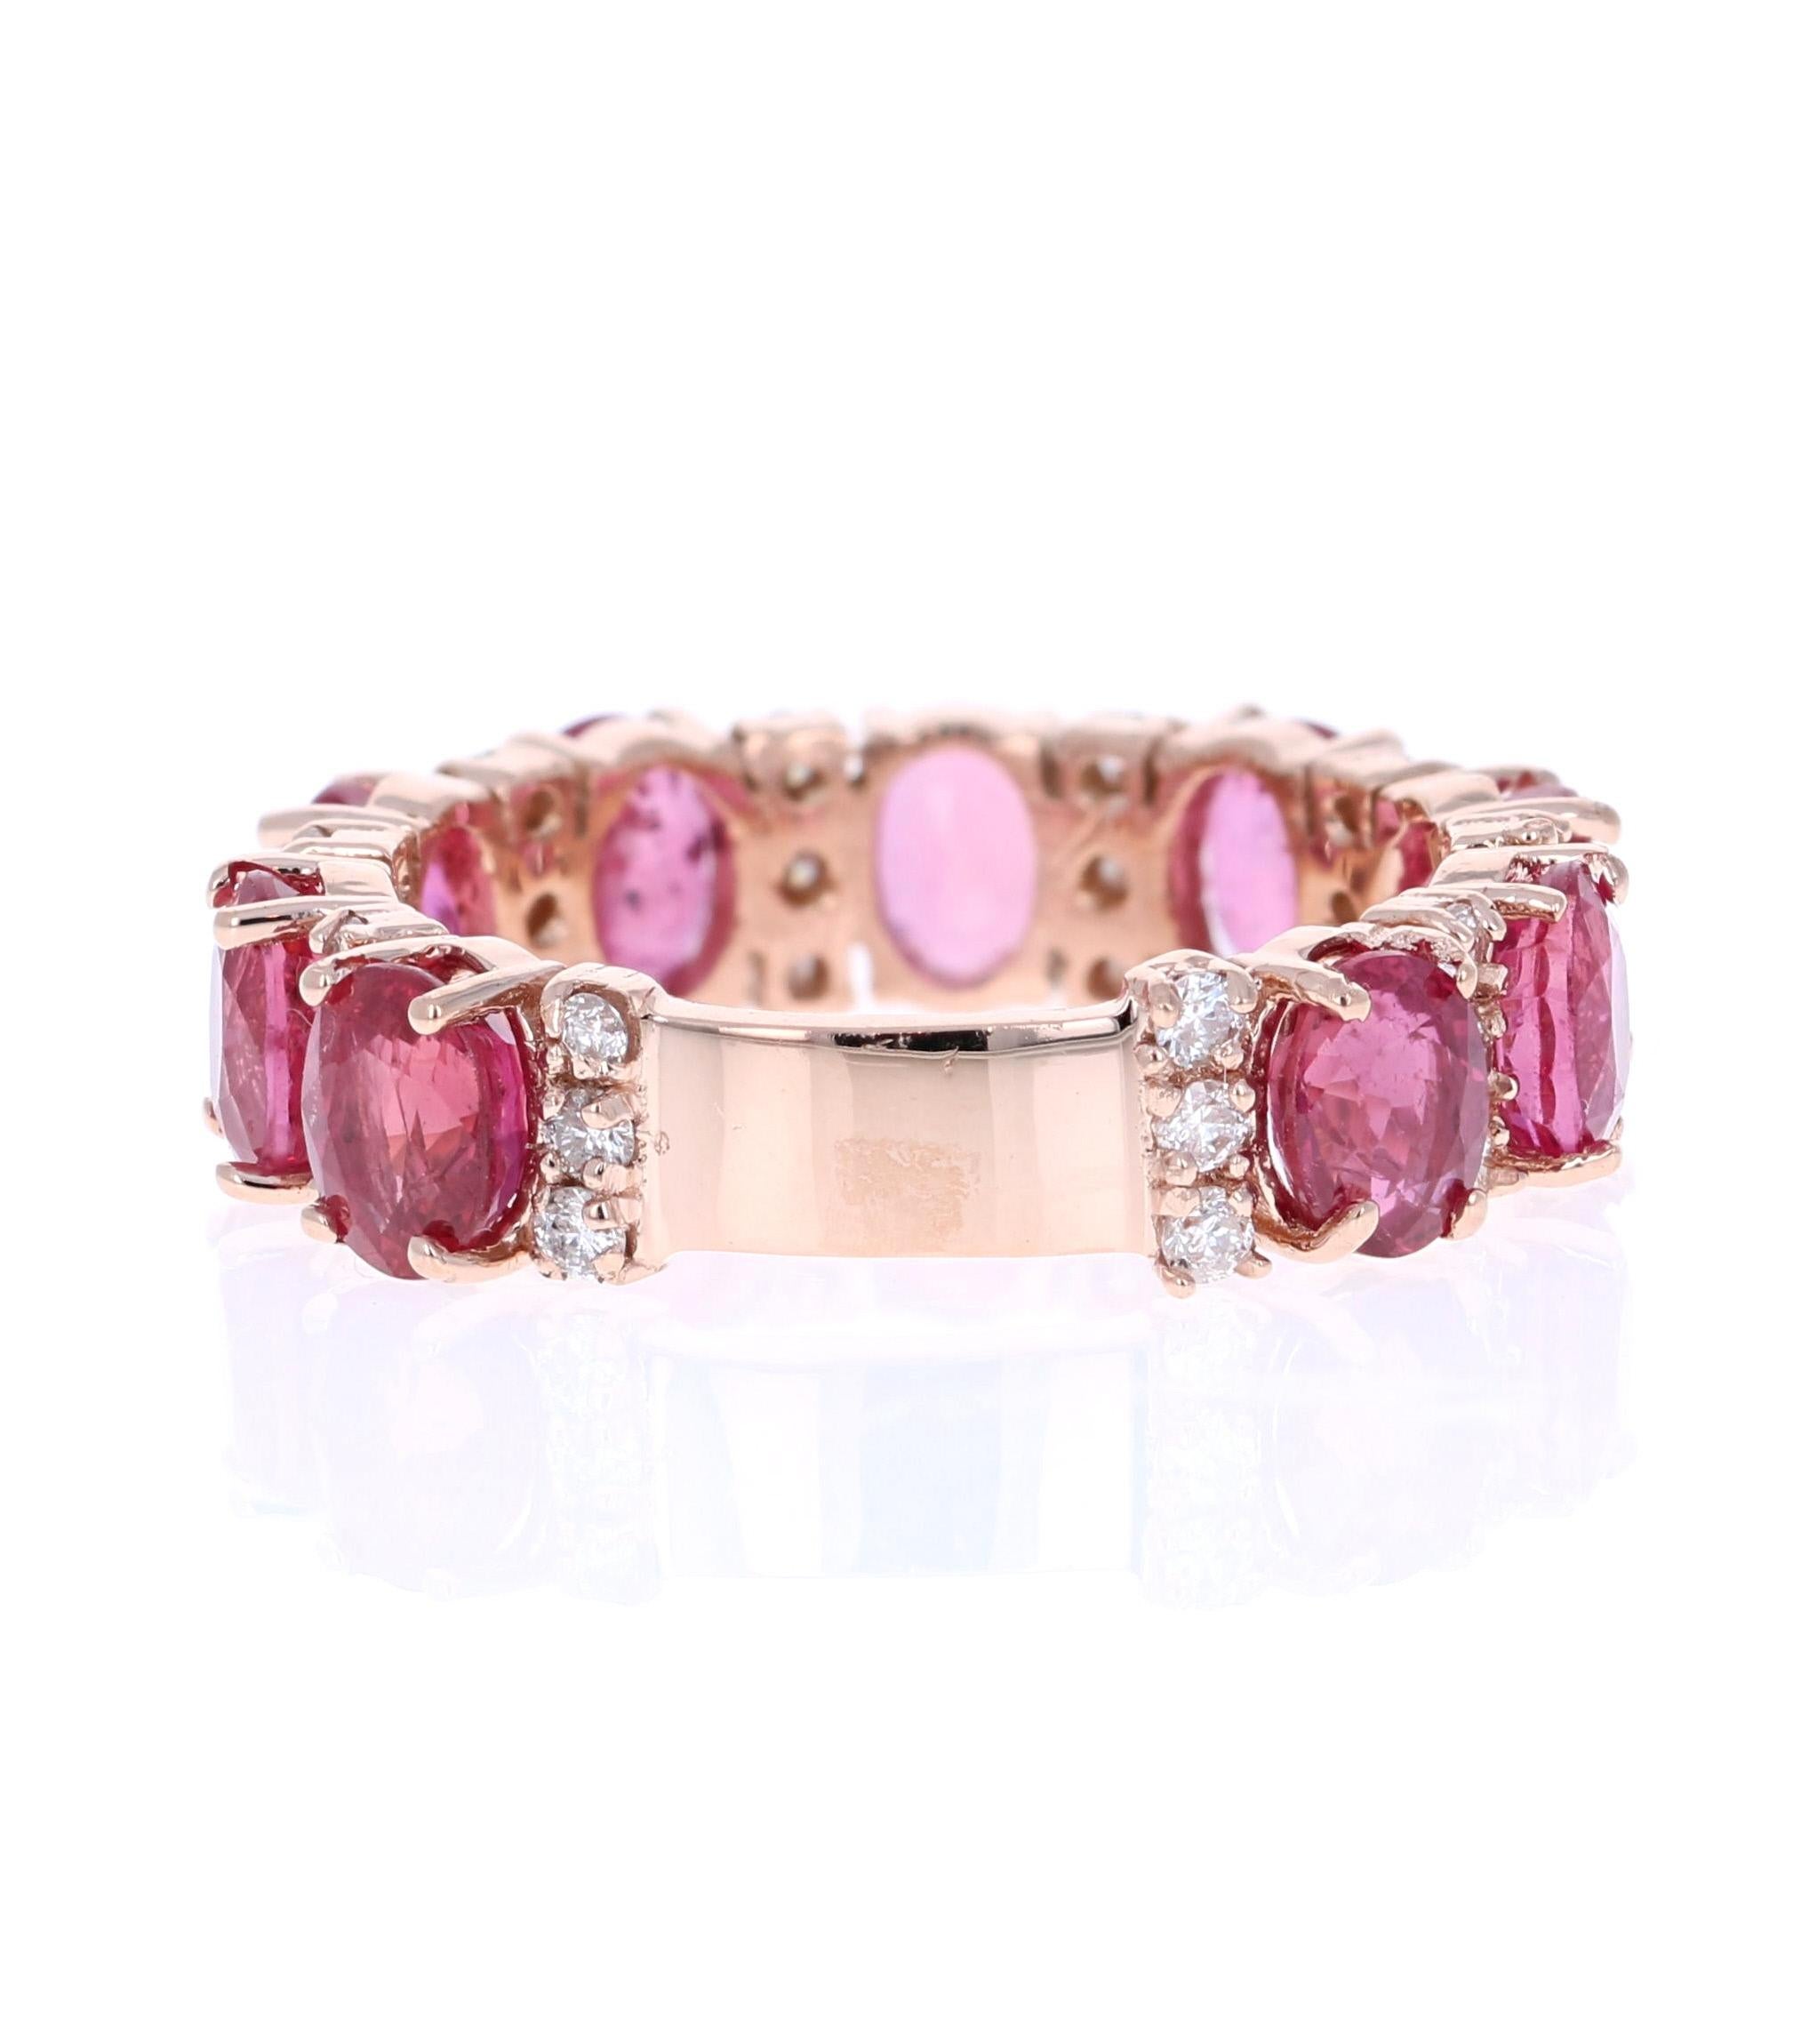 5.52 Carat Oval Cut Ruby Diamond 14 Karat Rose Gold Band In New Condition For Sale In Los Angeles, CA